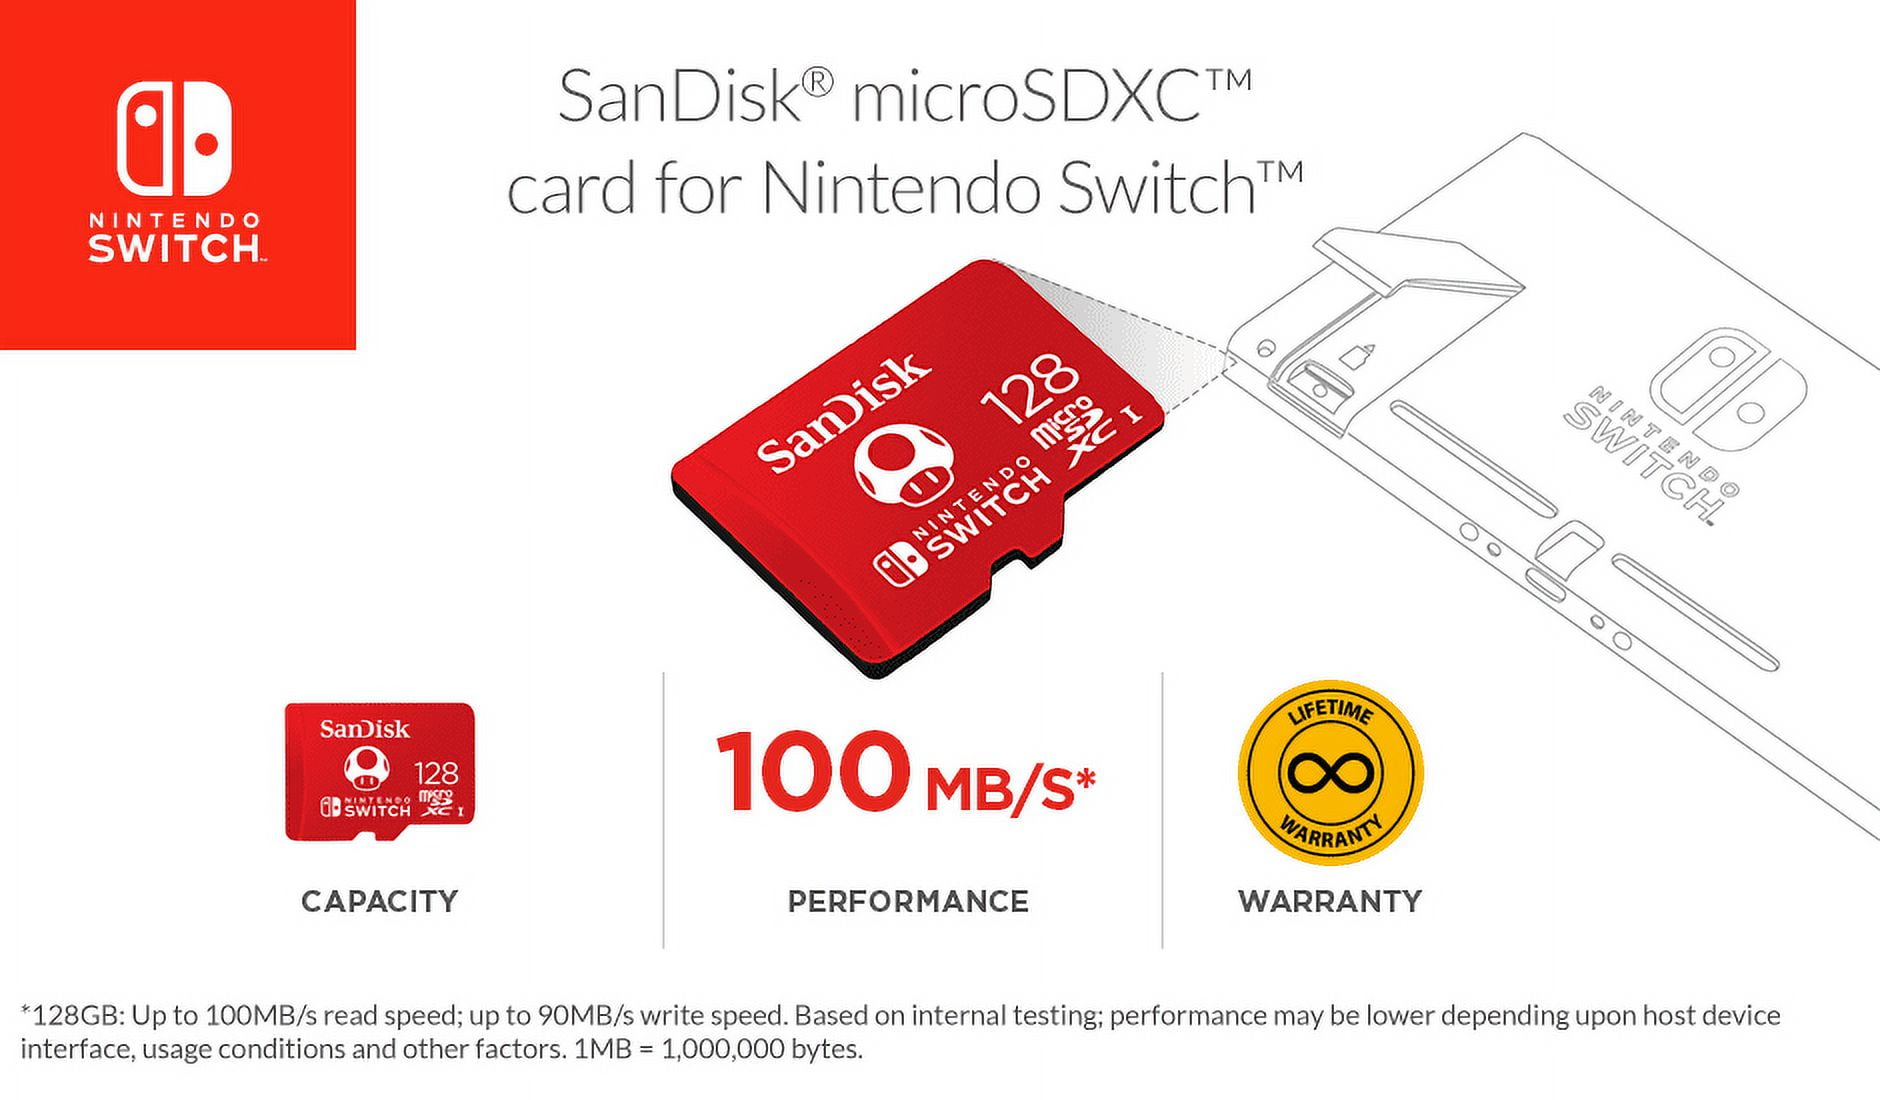 SanDisk 128GB microSDXC Card for the Nintendo Switch - 2-Pack 